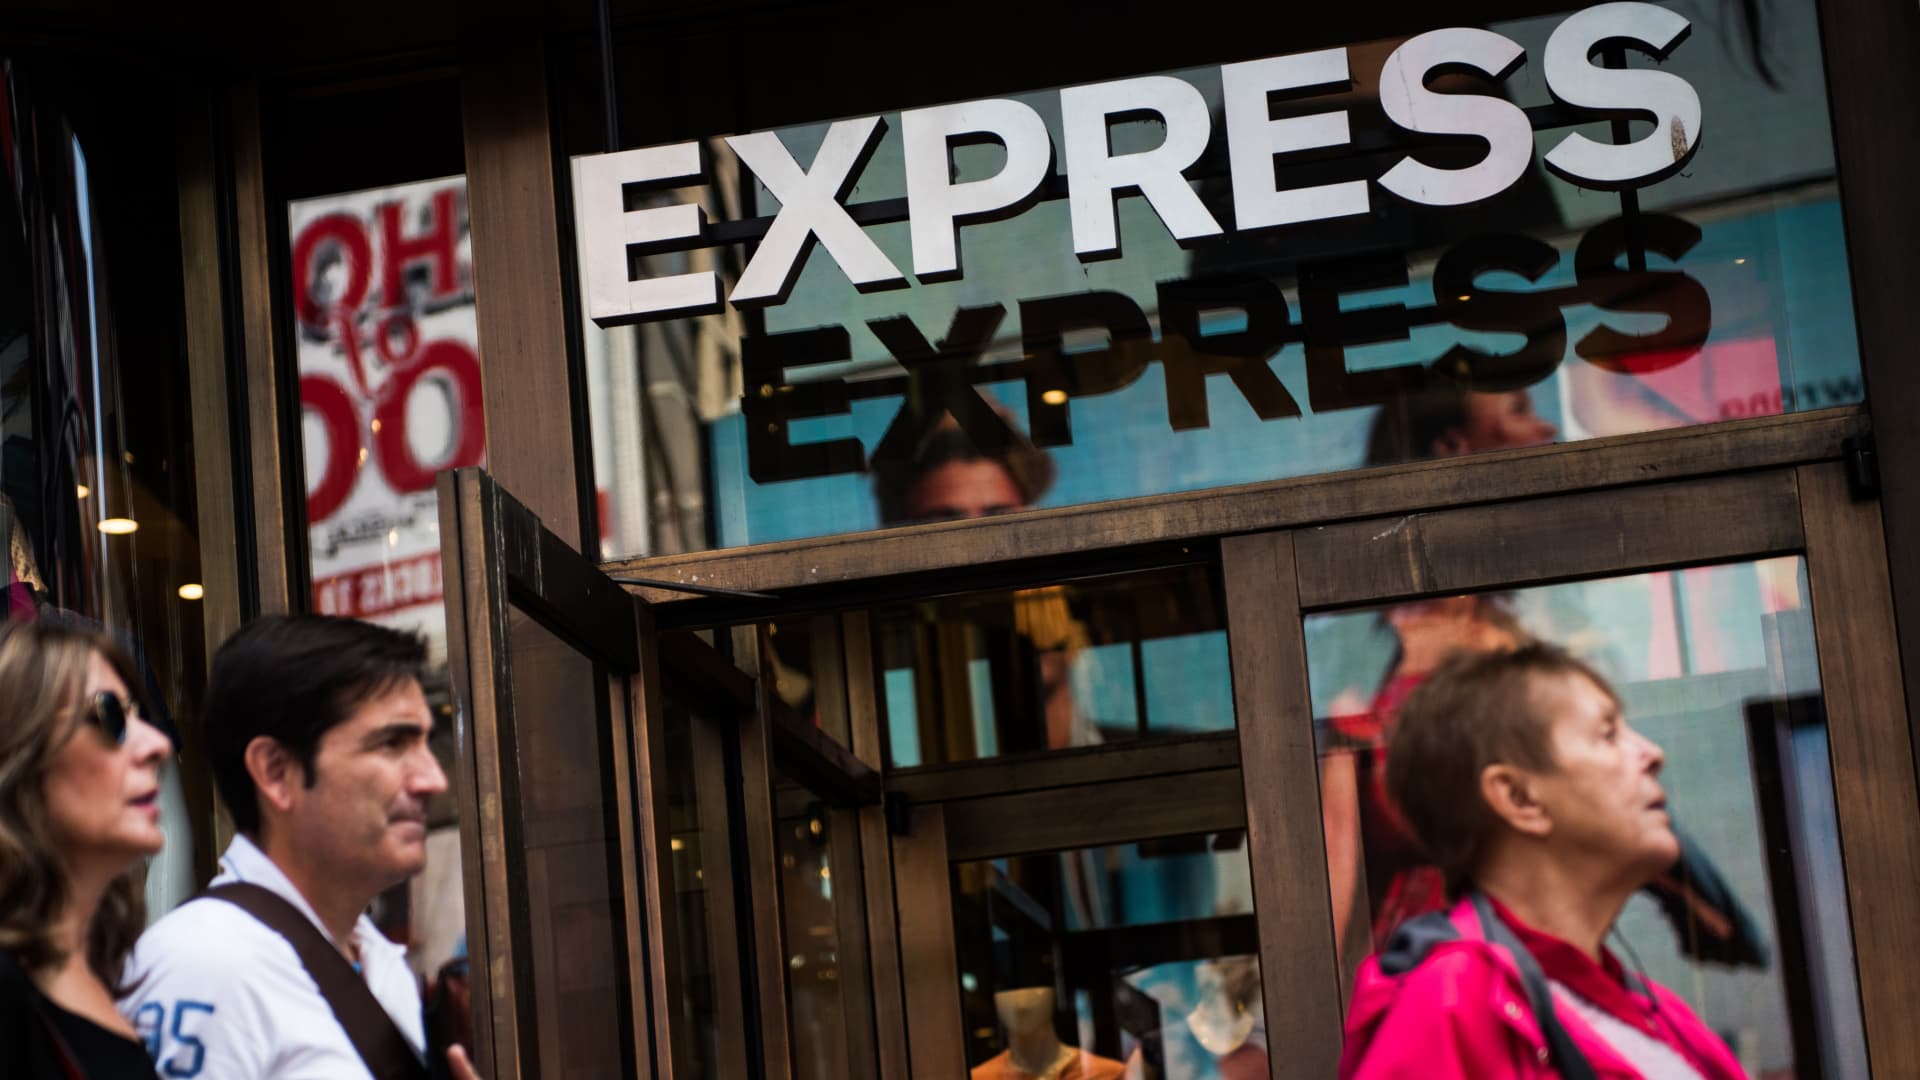 Express files for bankruptcy, plans to close nearly 100 stores as investor group looks to save the brand